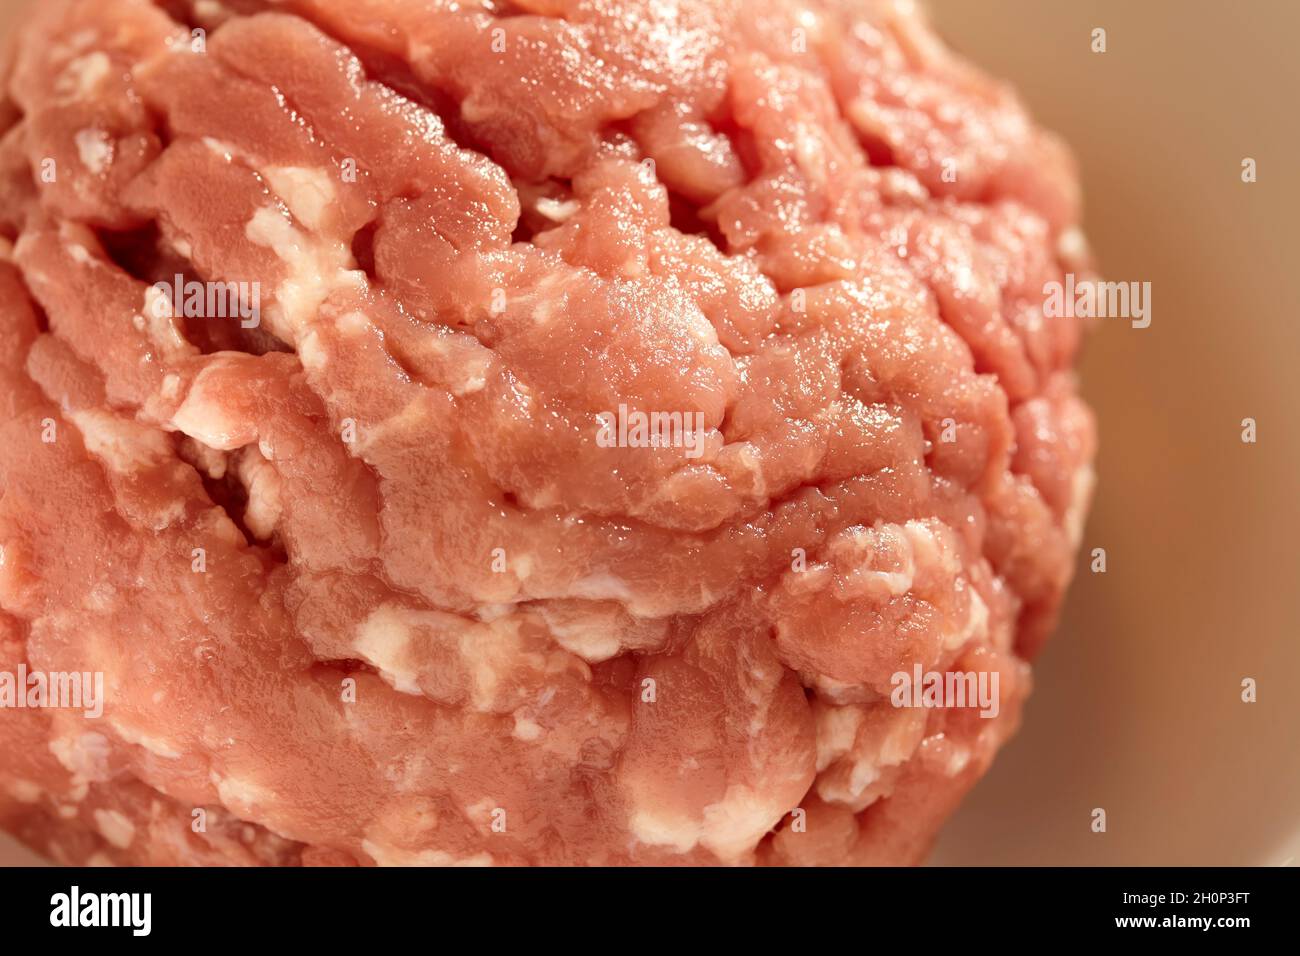 Fresh, raw ground pork, called mince in some places. Stock Photo